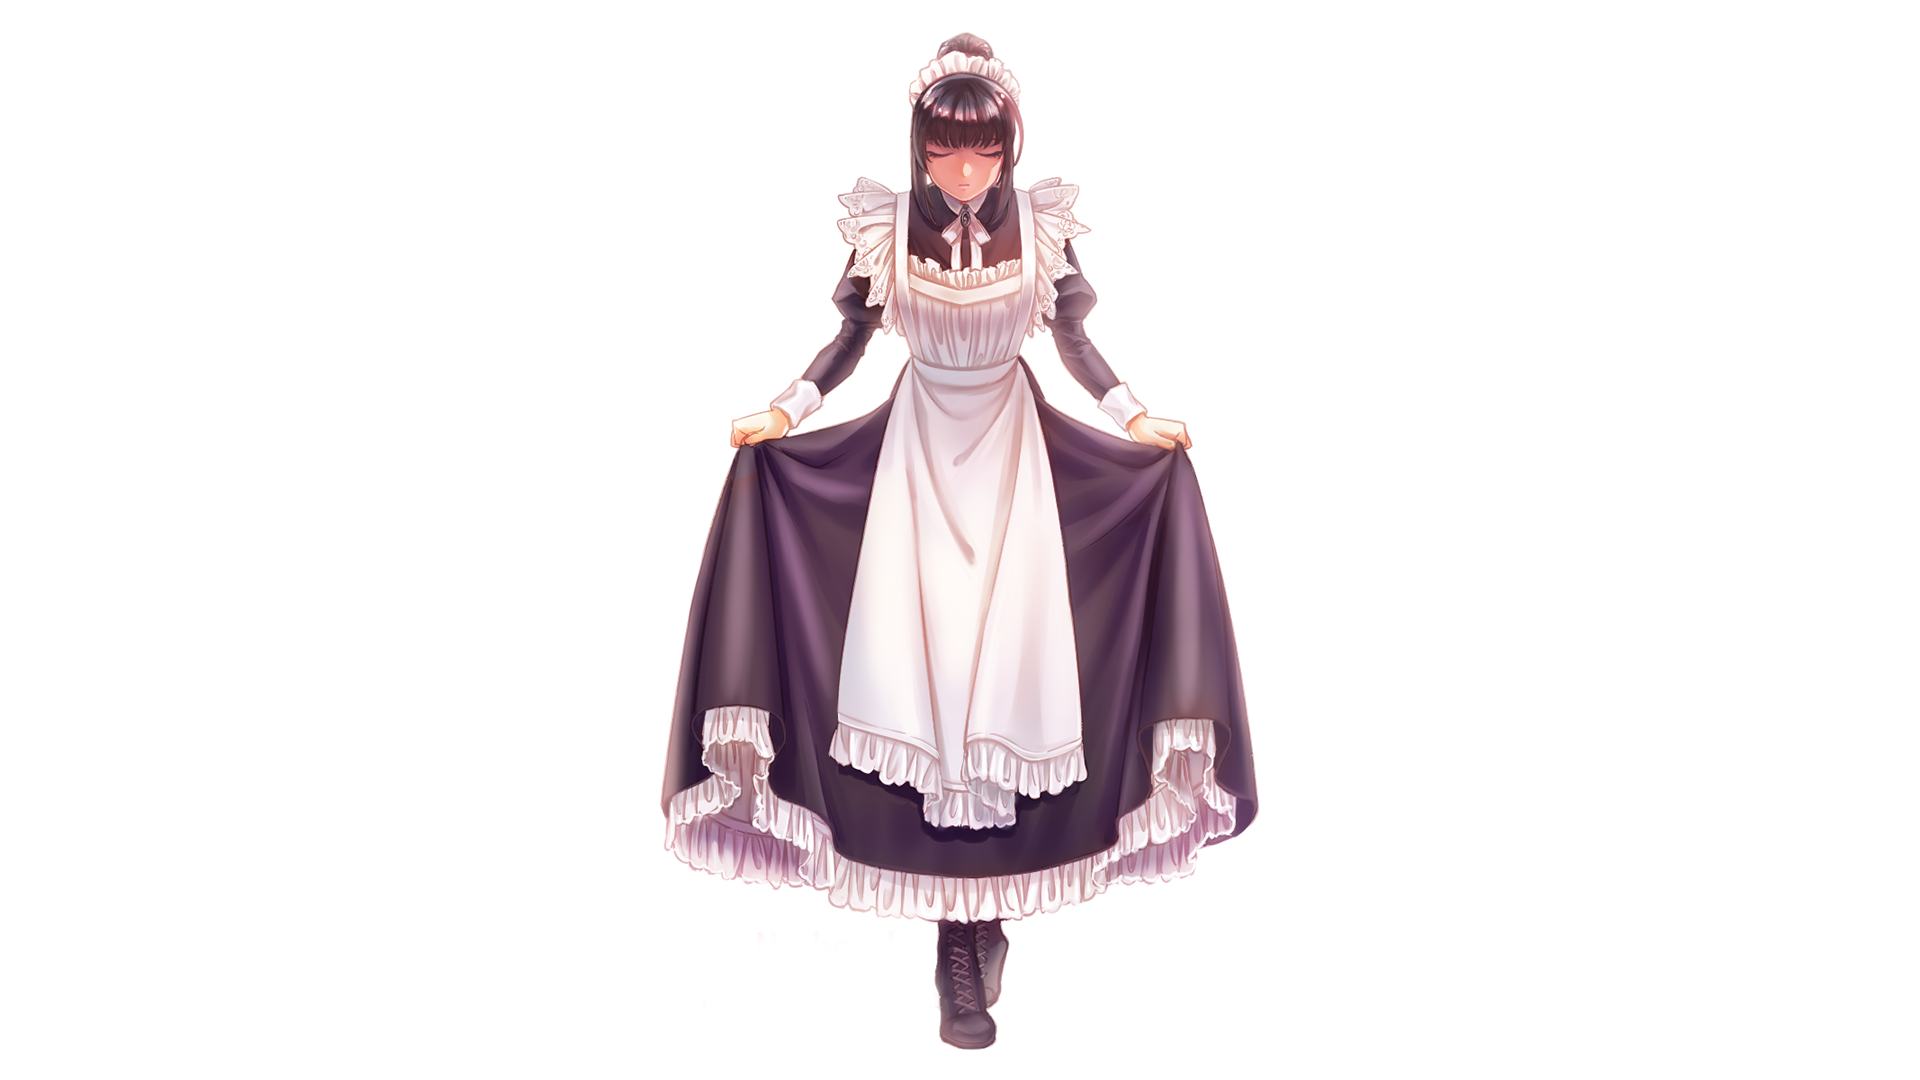 Anime 1920x1080 Overlord (anime) maid Gamma Narberal anime white background simple background maid outfit closed eyes dress standing dark hair anime girls Narberal Gamma